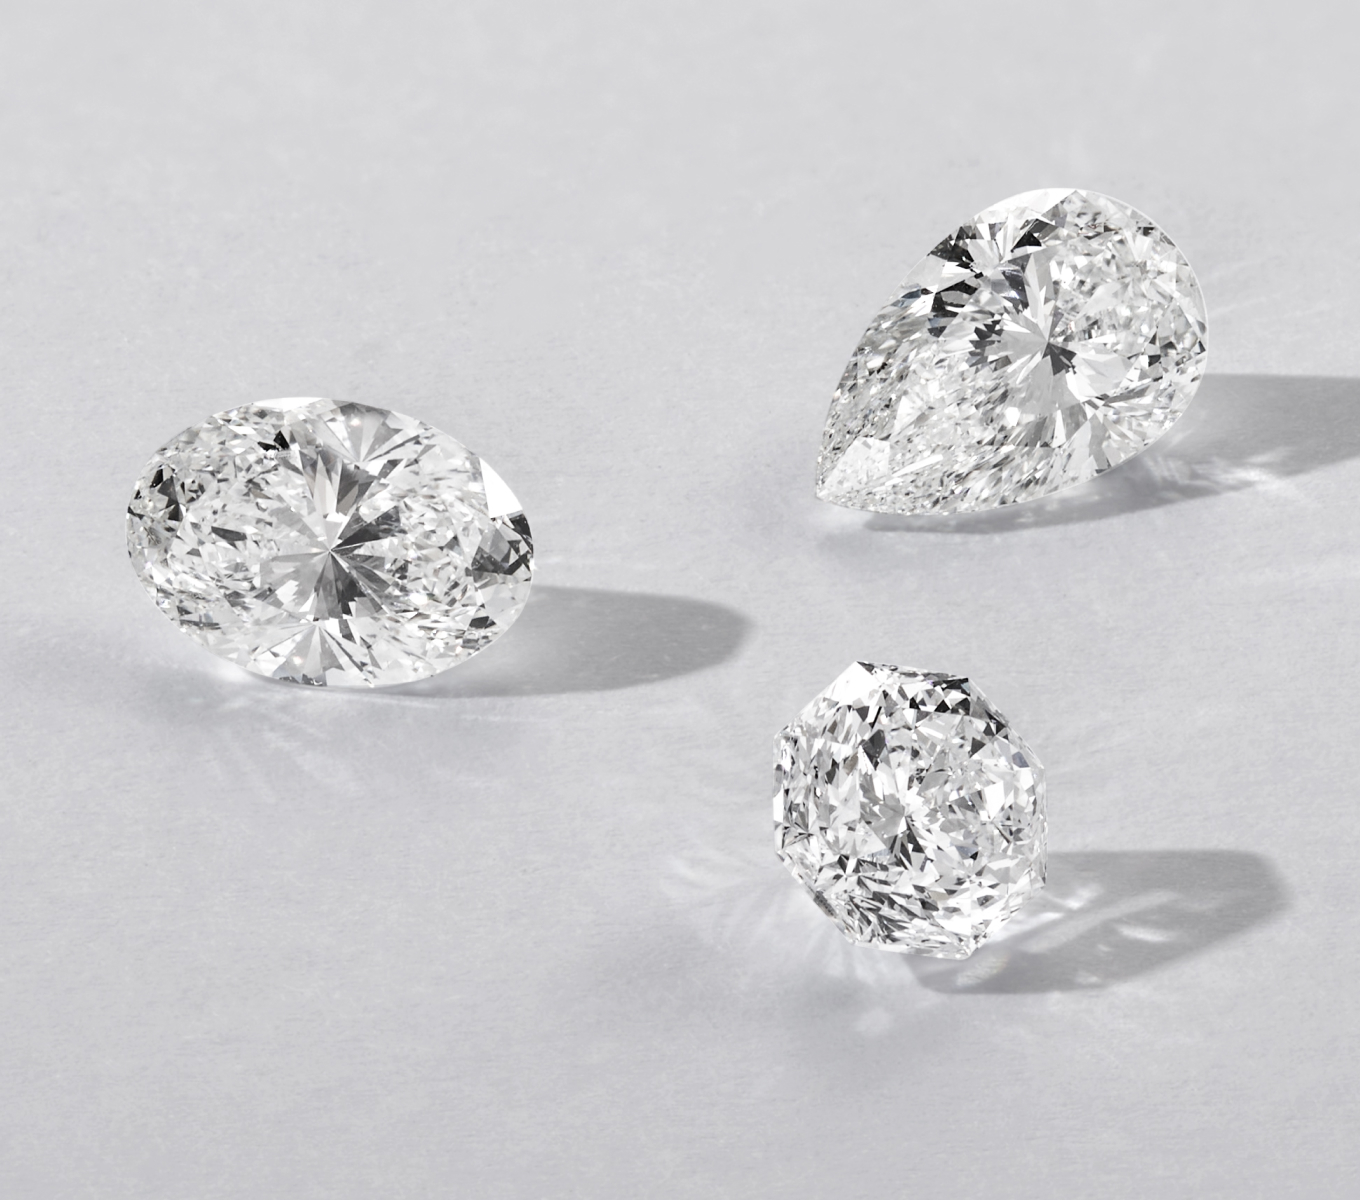 Stargazer Lab-Grown Diamonds. The additional facets in these diamonds, as well as their perfect alignment, add to the overall show-stopping appearance. They are also certified by the International Gemological Institute and offer superior sparkle. Our Stargazer Lab-Grown Diamonds are available in oval, pear, and octagon, a new shape at Shane Co.